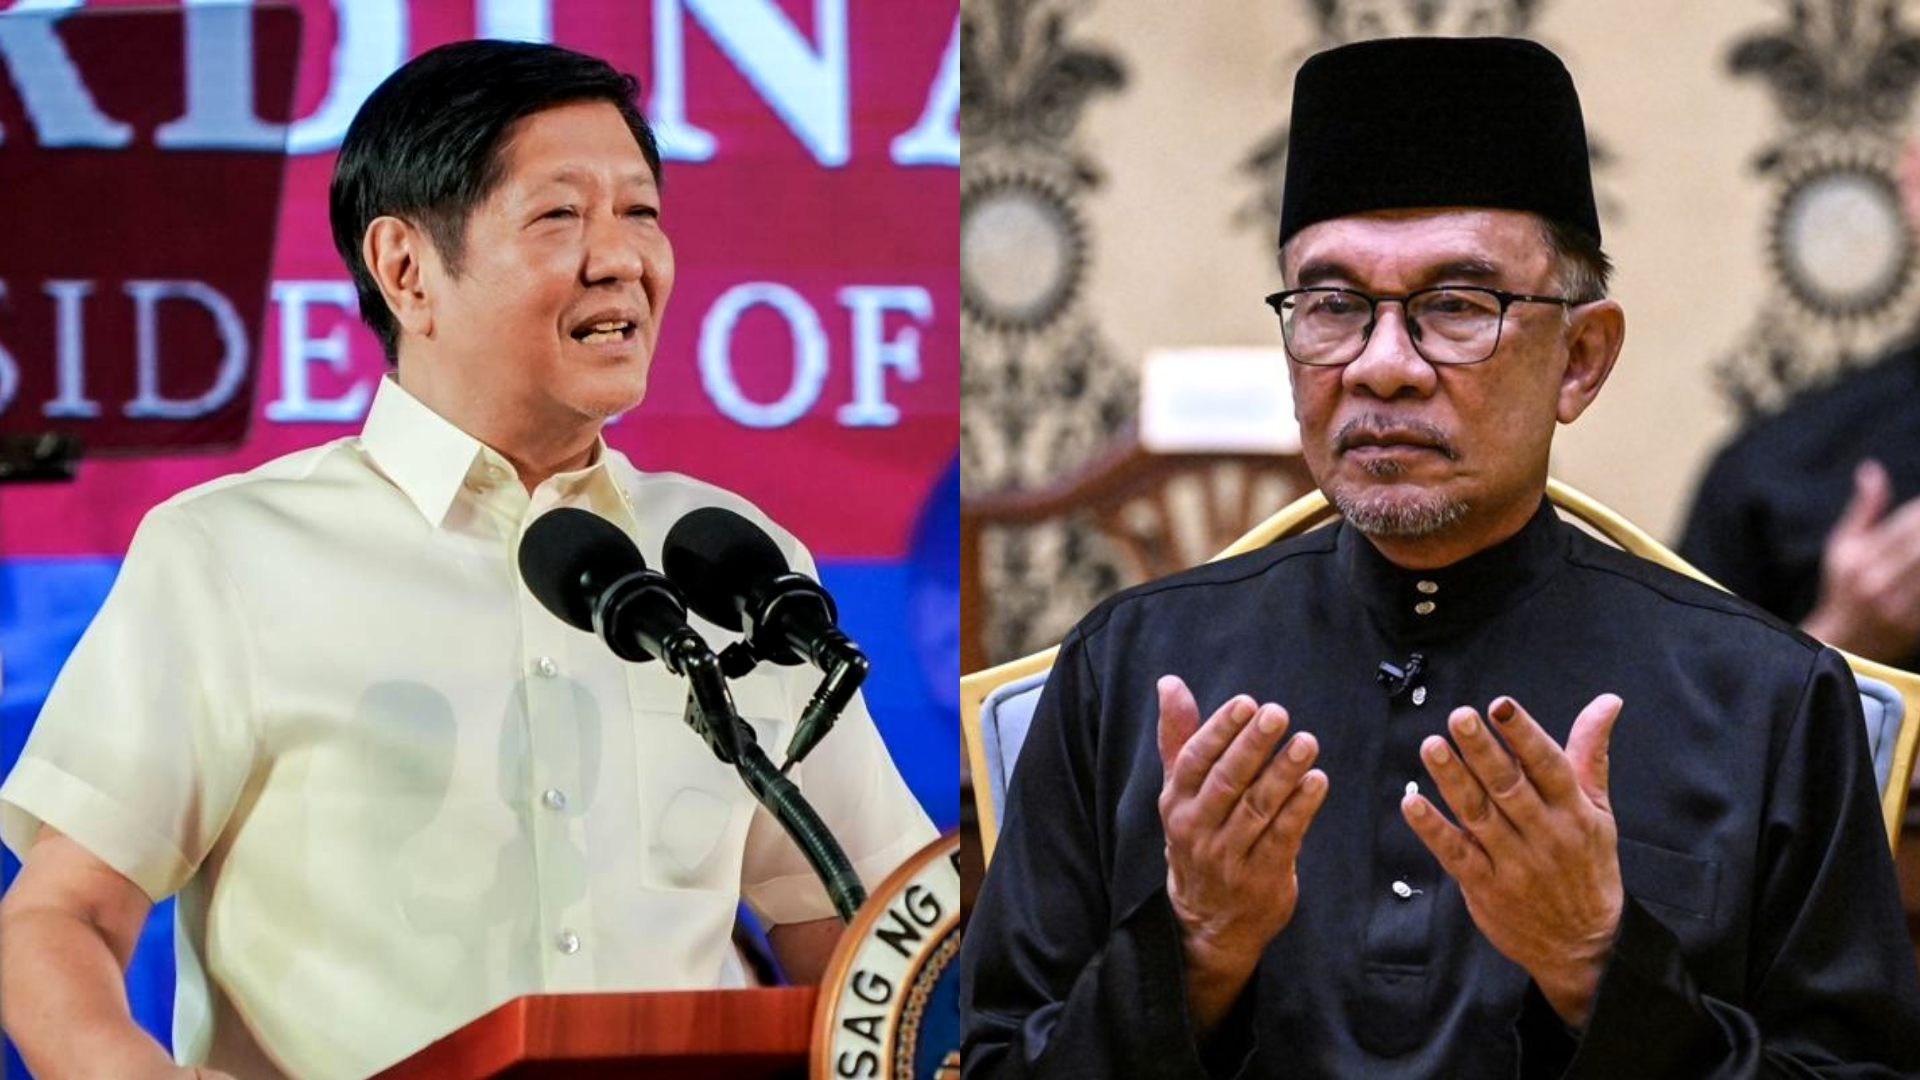 President Ferdinand “Bongbong” Marcos Jr. and Malaysia Prime Minister Dato' Seri Anwar Ibrahim will discuss areas of cooperation between the two nations during their bilateral meeting on March 1, Malacañang said Tuesday.